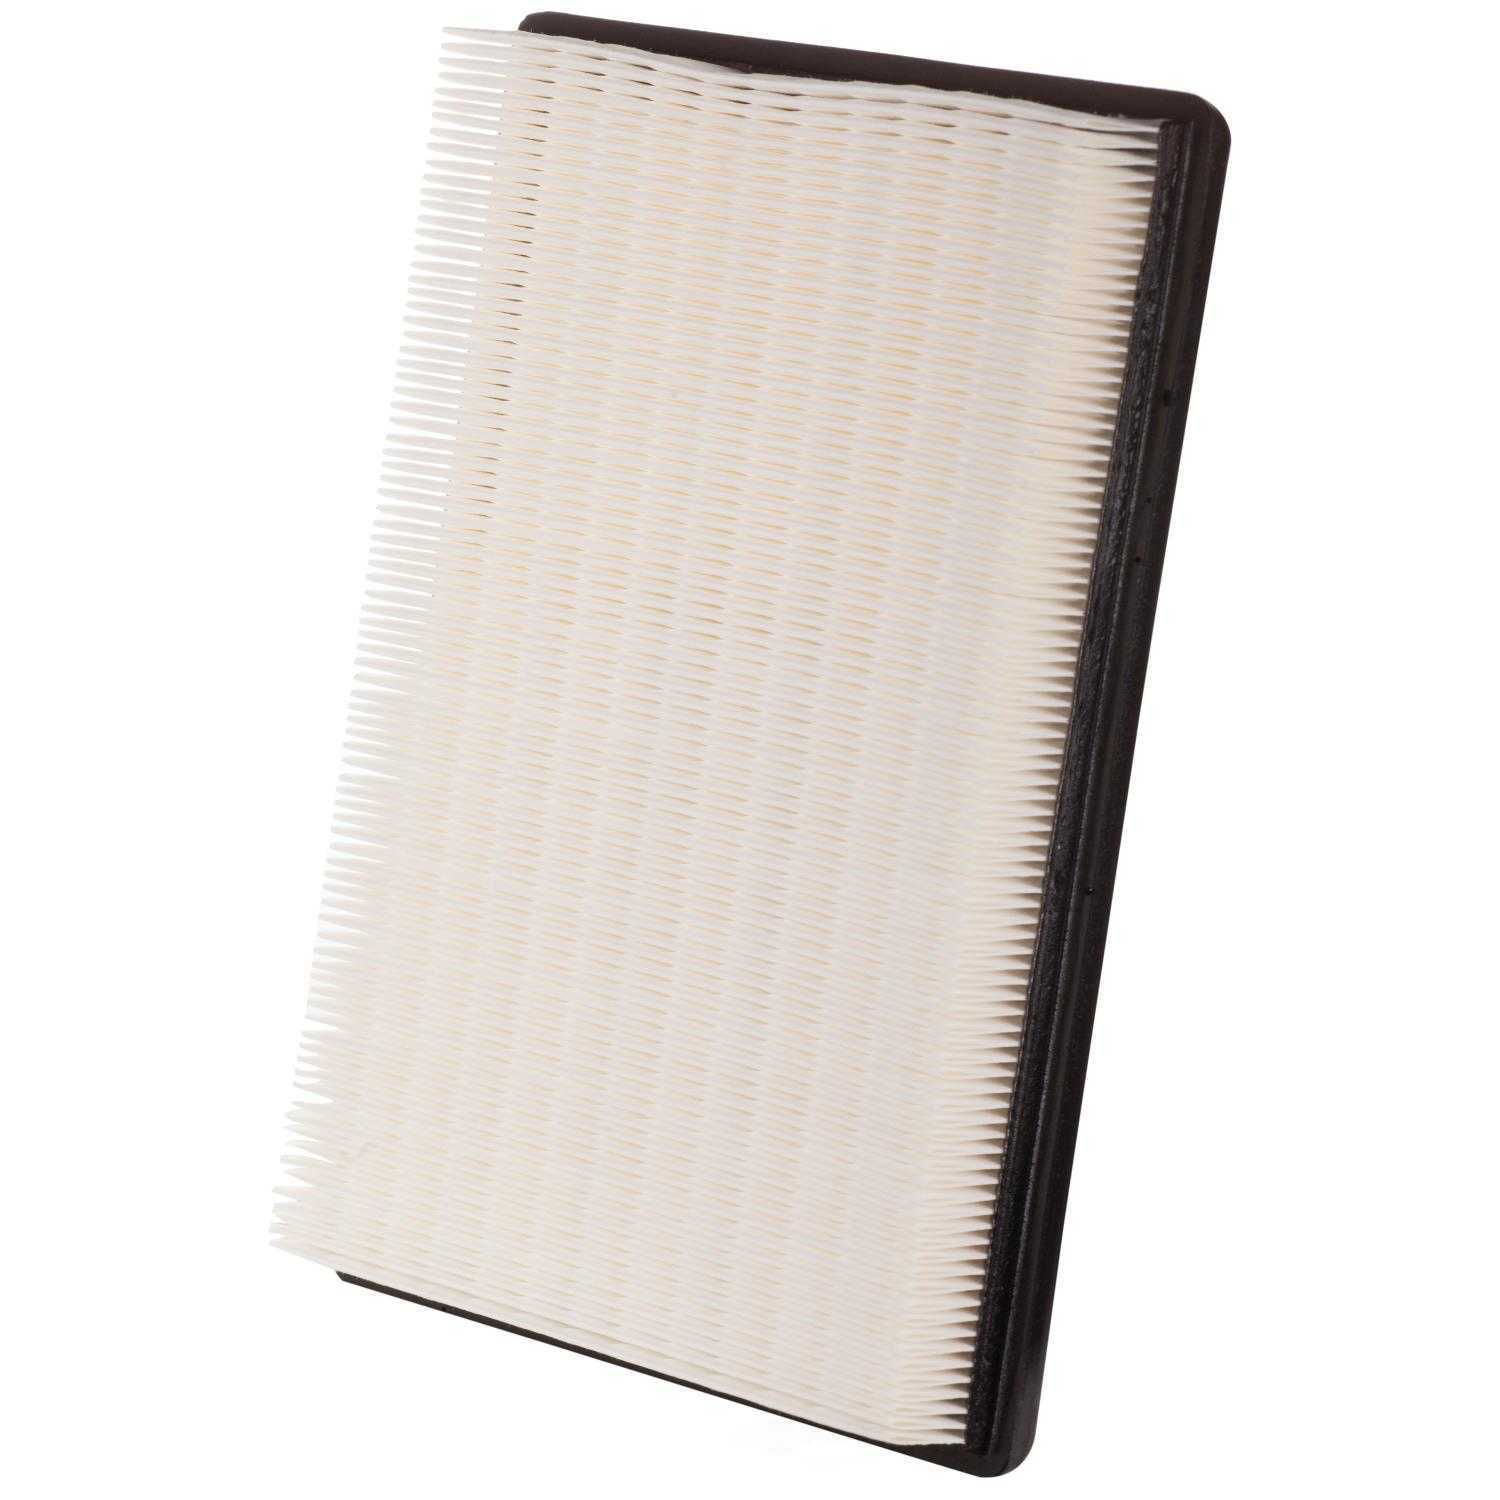 Air Filter Federated PA5560 for Chrysler 300 Dodge Charger Challenger Magnum